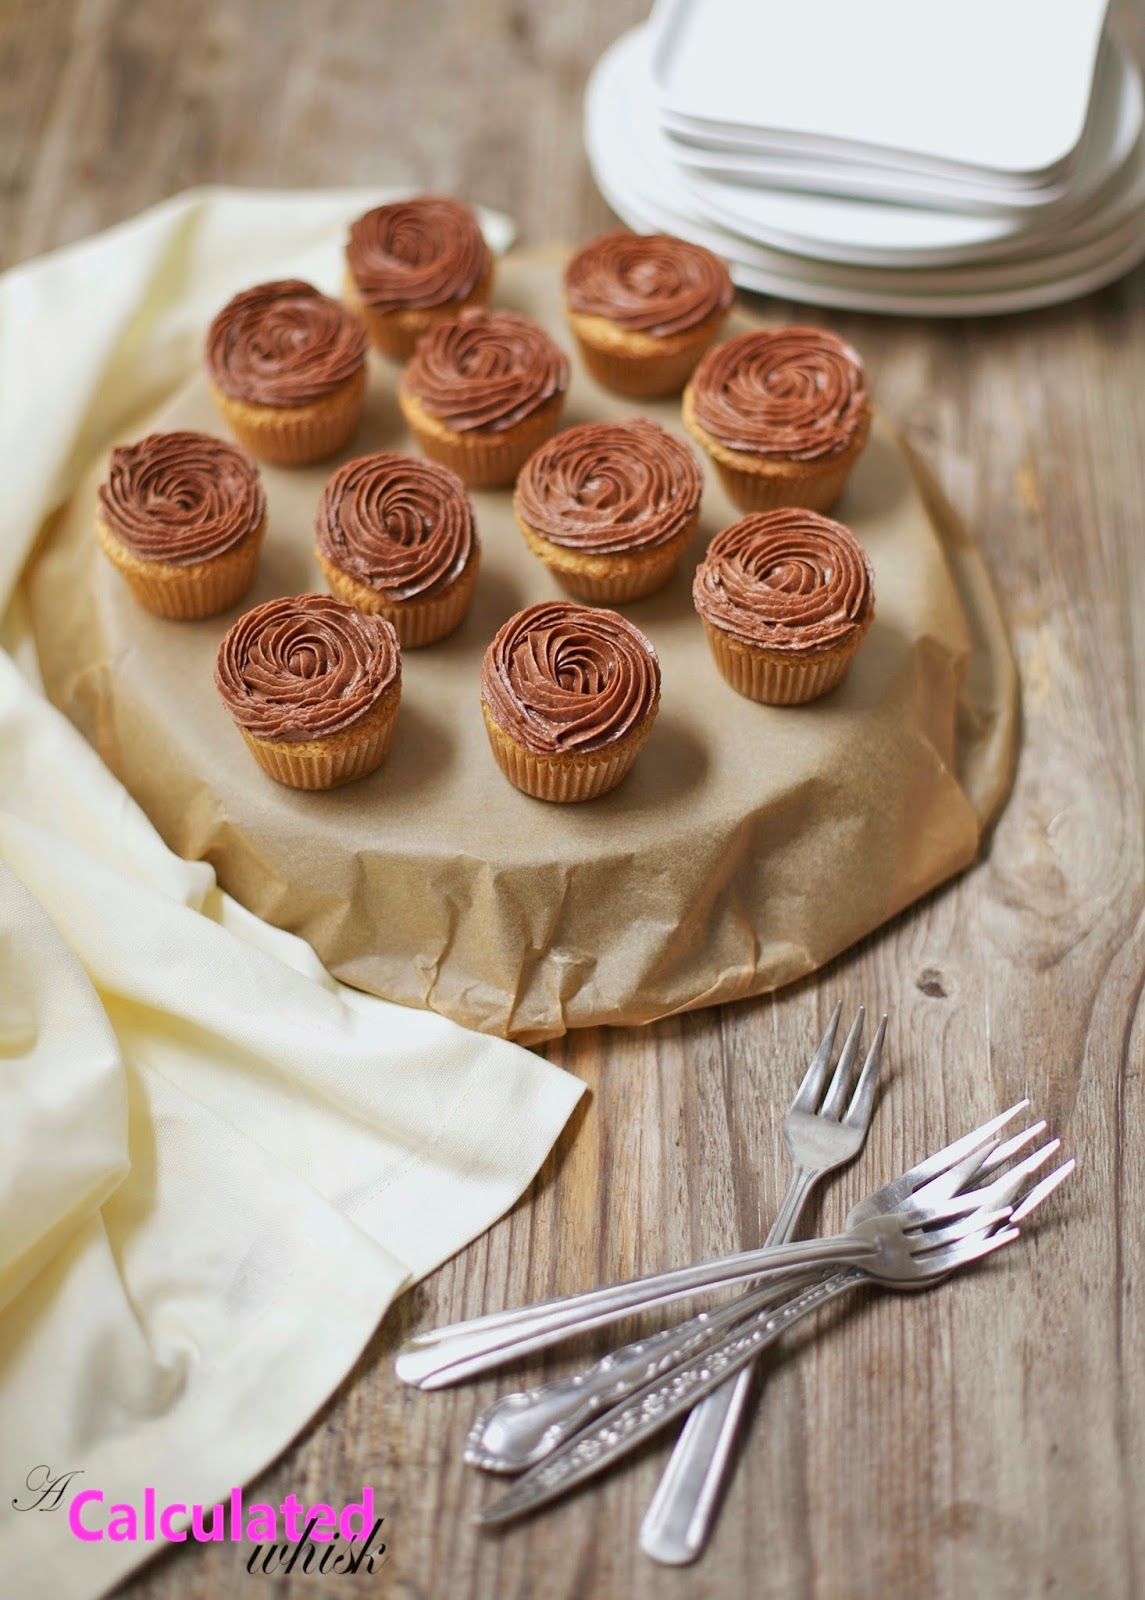 Easy Vanilla Cupcakes with Chocolate Frosting (Gluten-free, Grain-free) | acalculatedwhisk.com